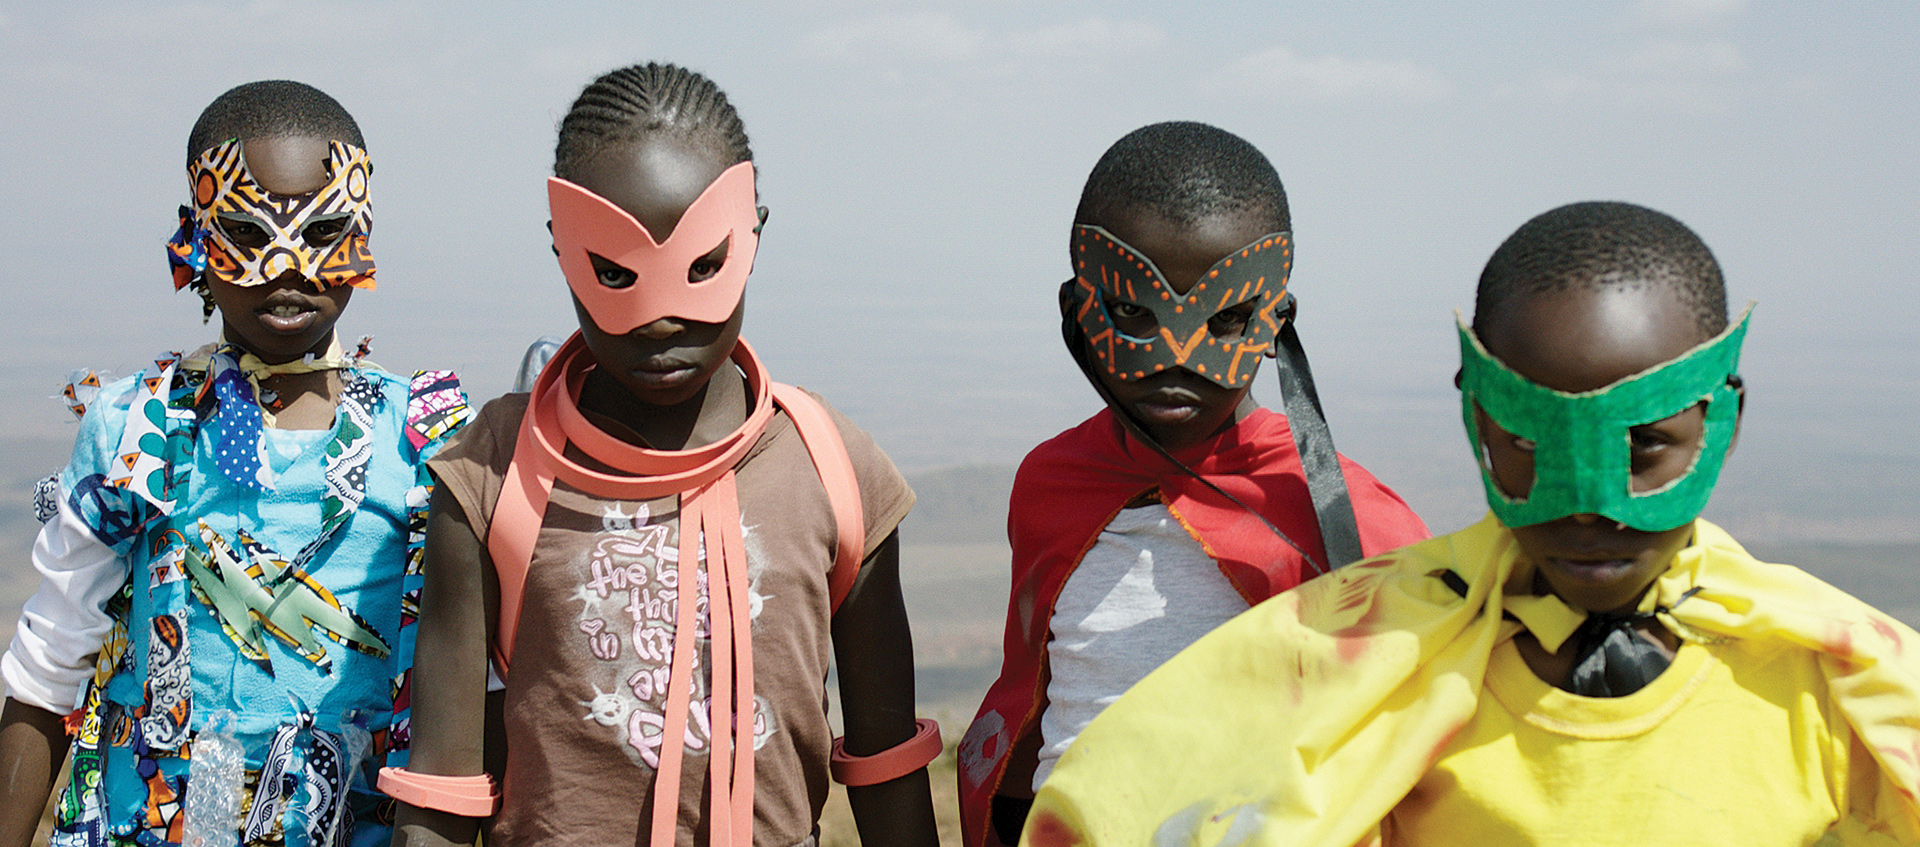 Four young Kenyan children in makeshift masks and superhero costumes, from the film Supa Modo